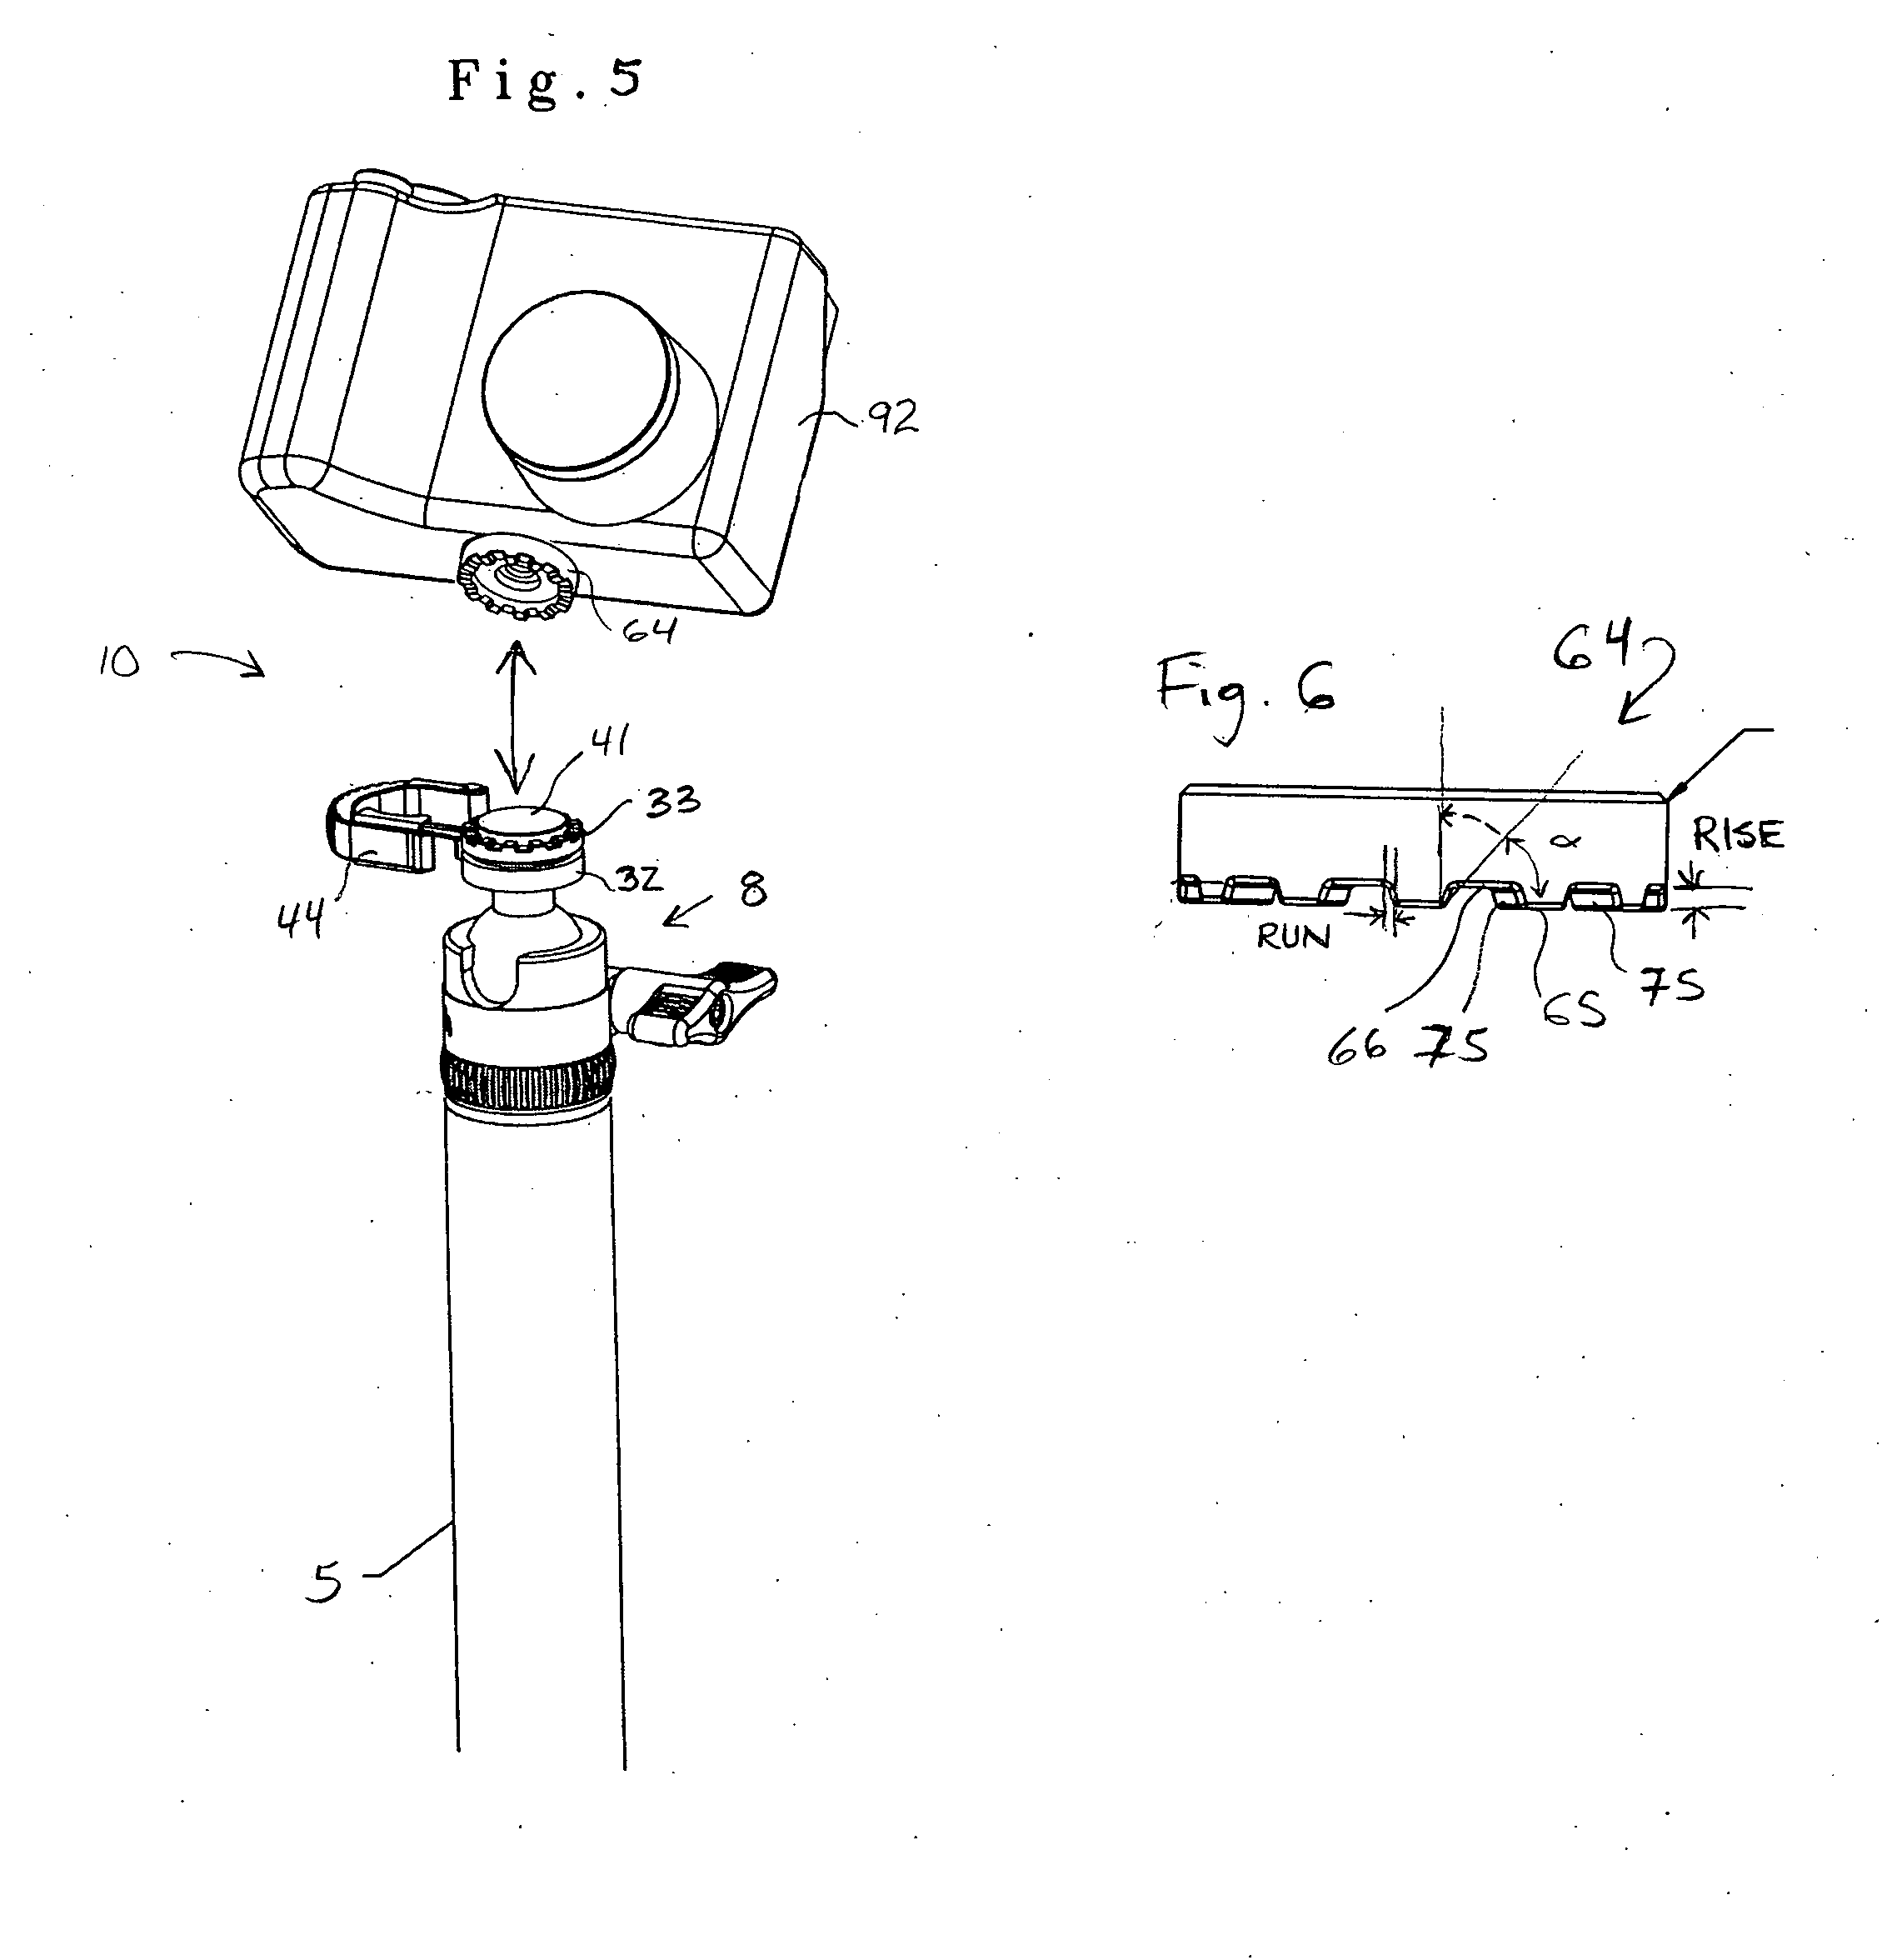 Magnetic-based releasable, adjustable camera or other device mount apparatus